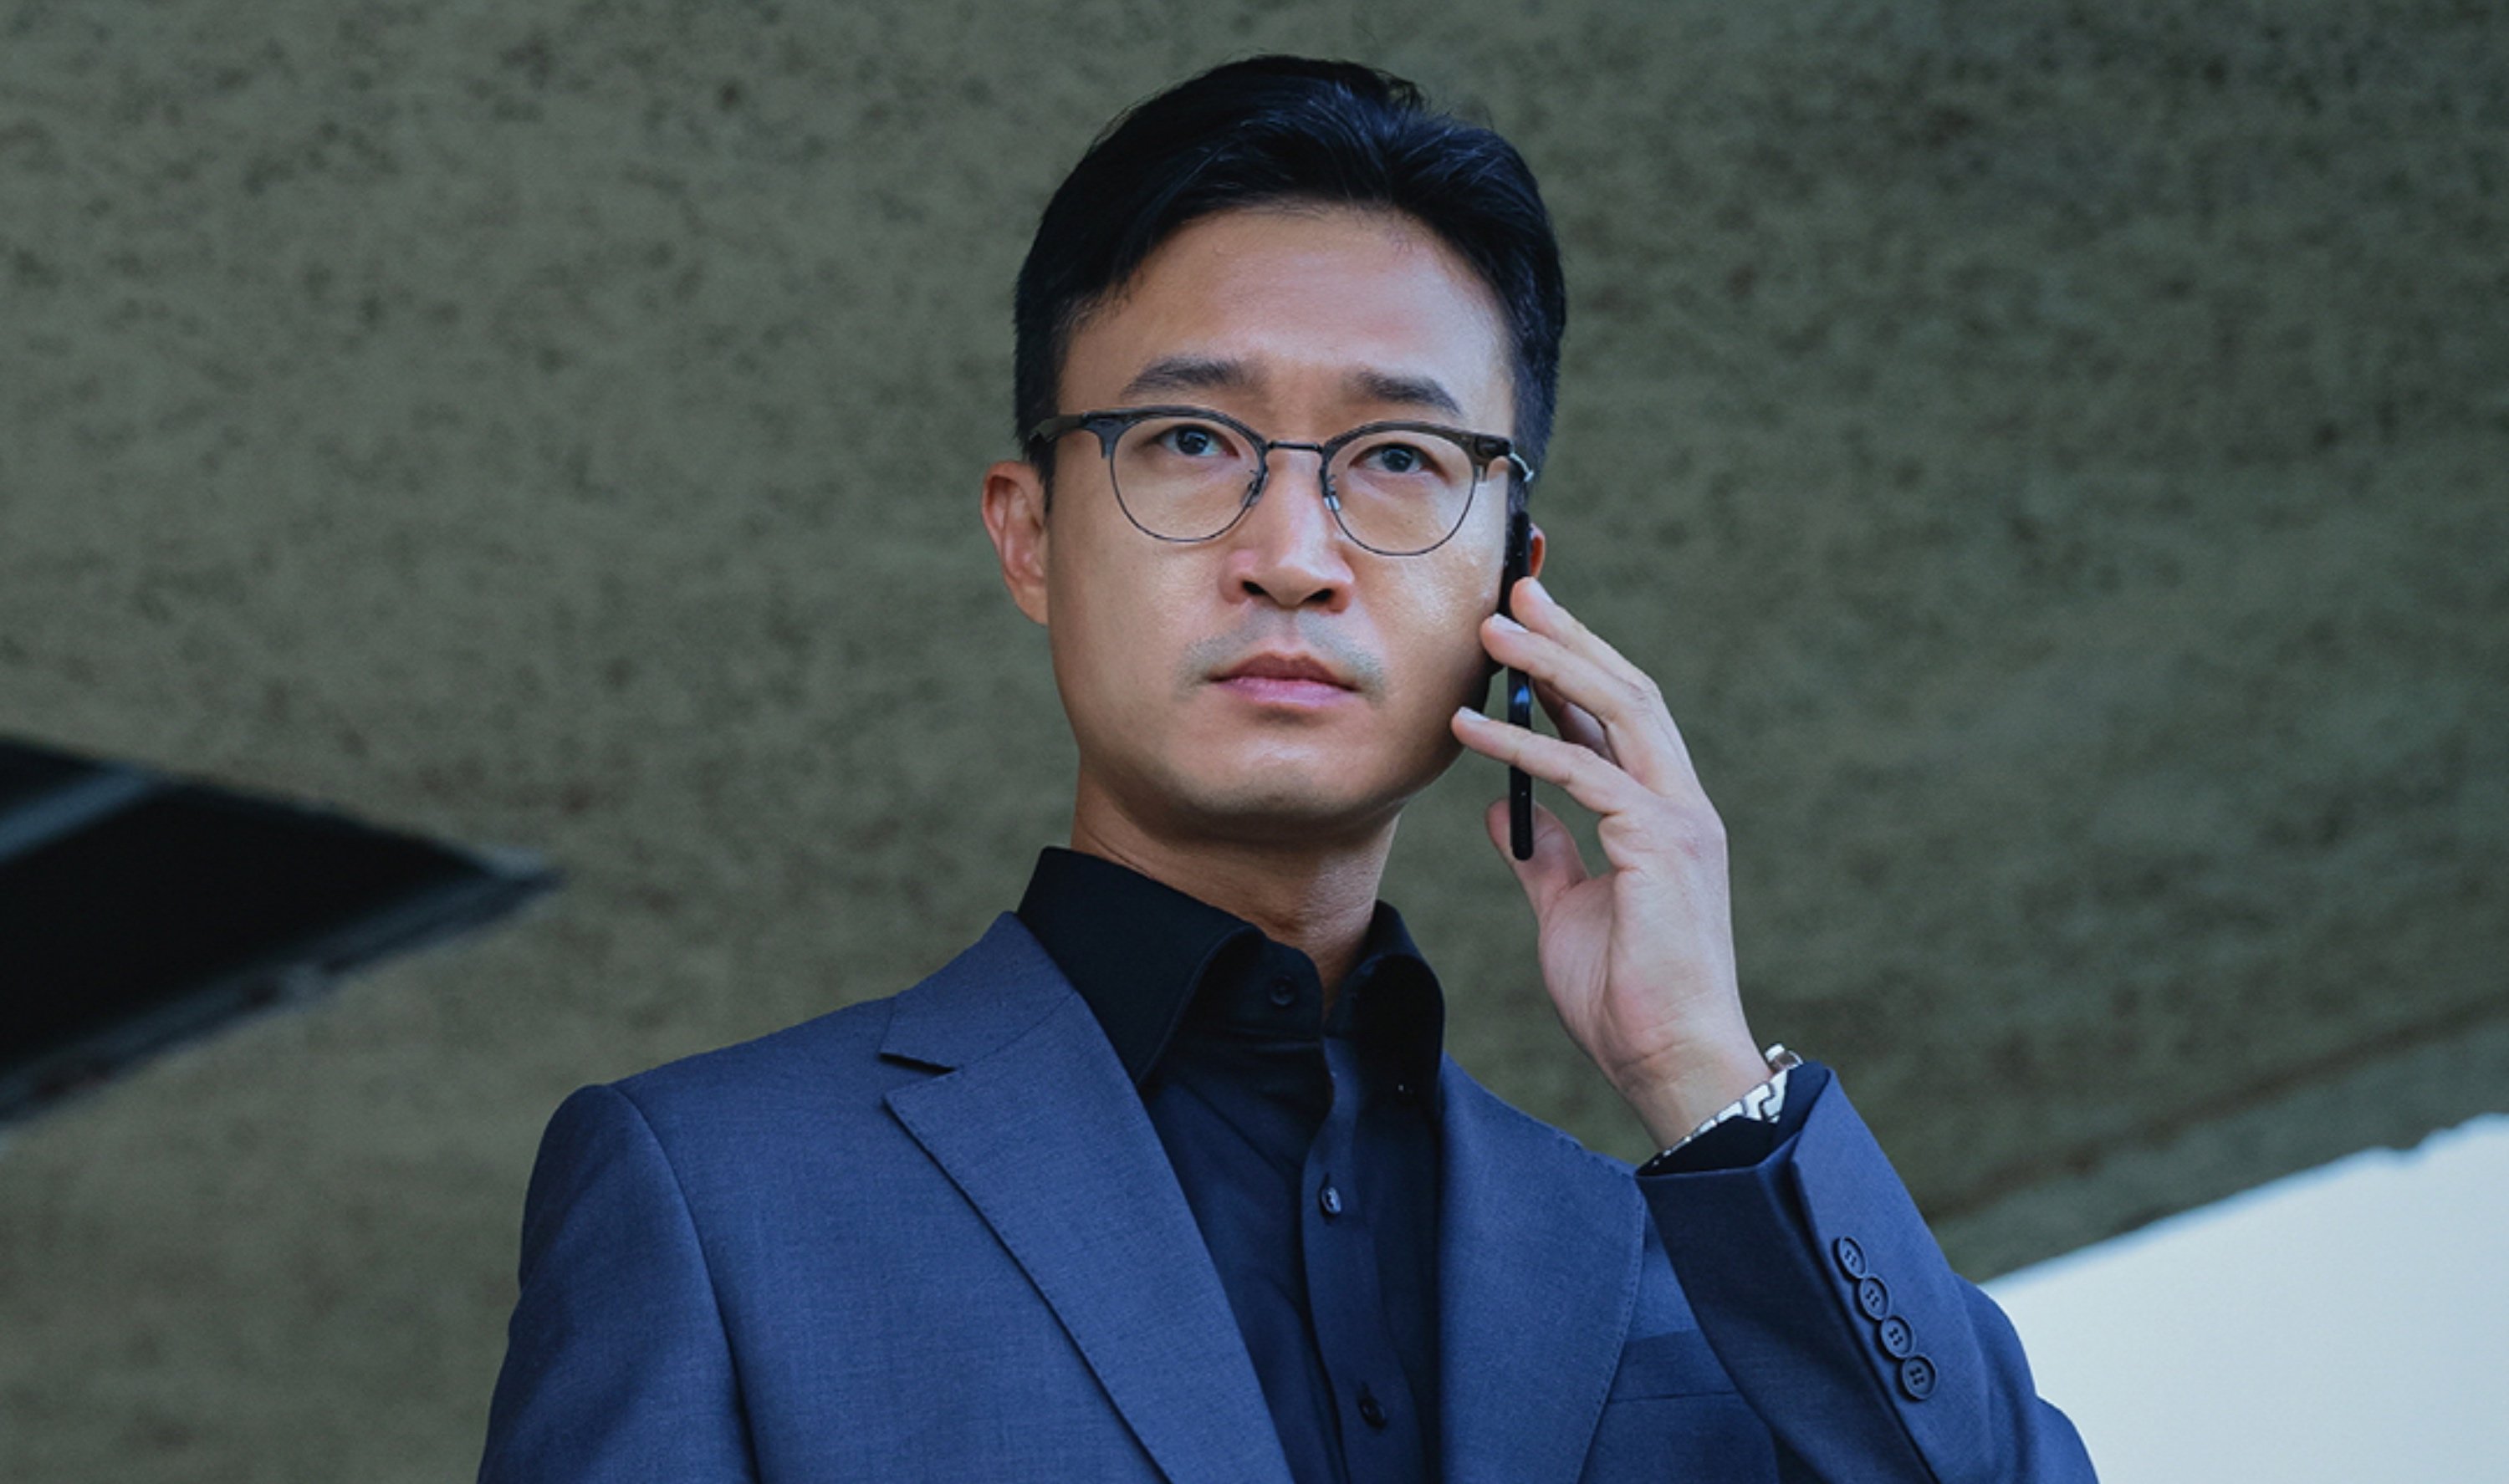 Character Han Tae-seok for 'Happiness' episode 2 k-drama on a phone call